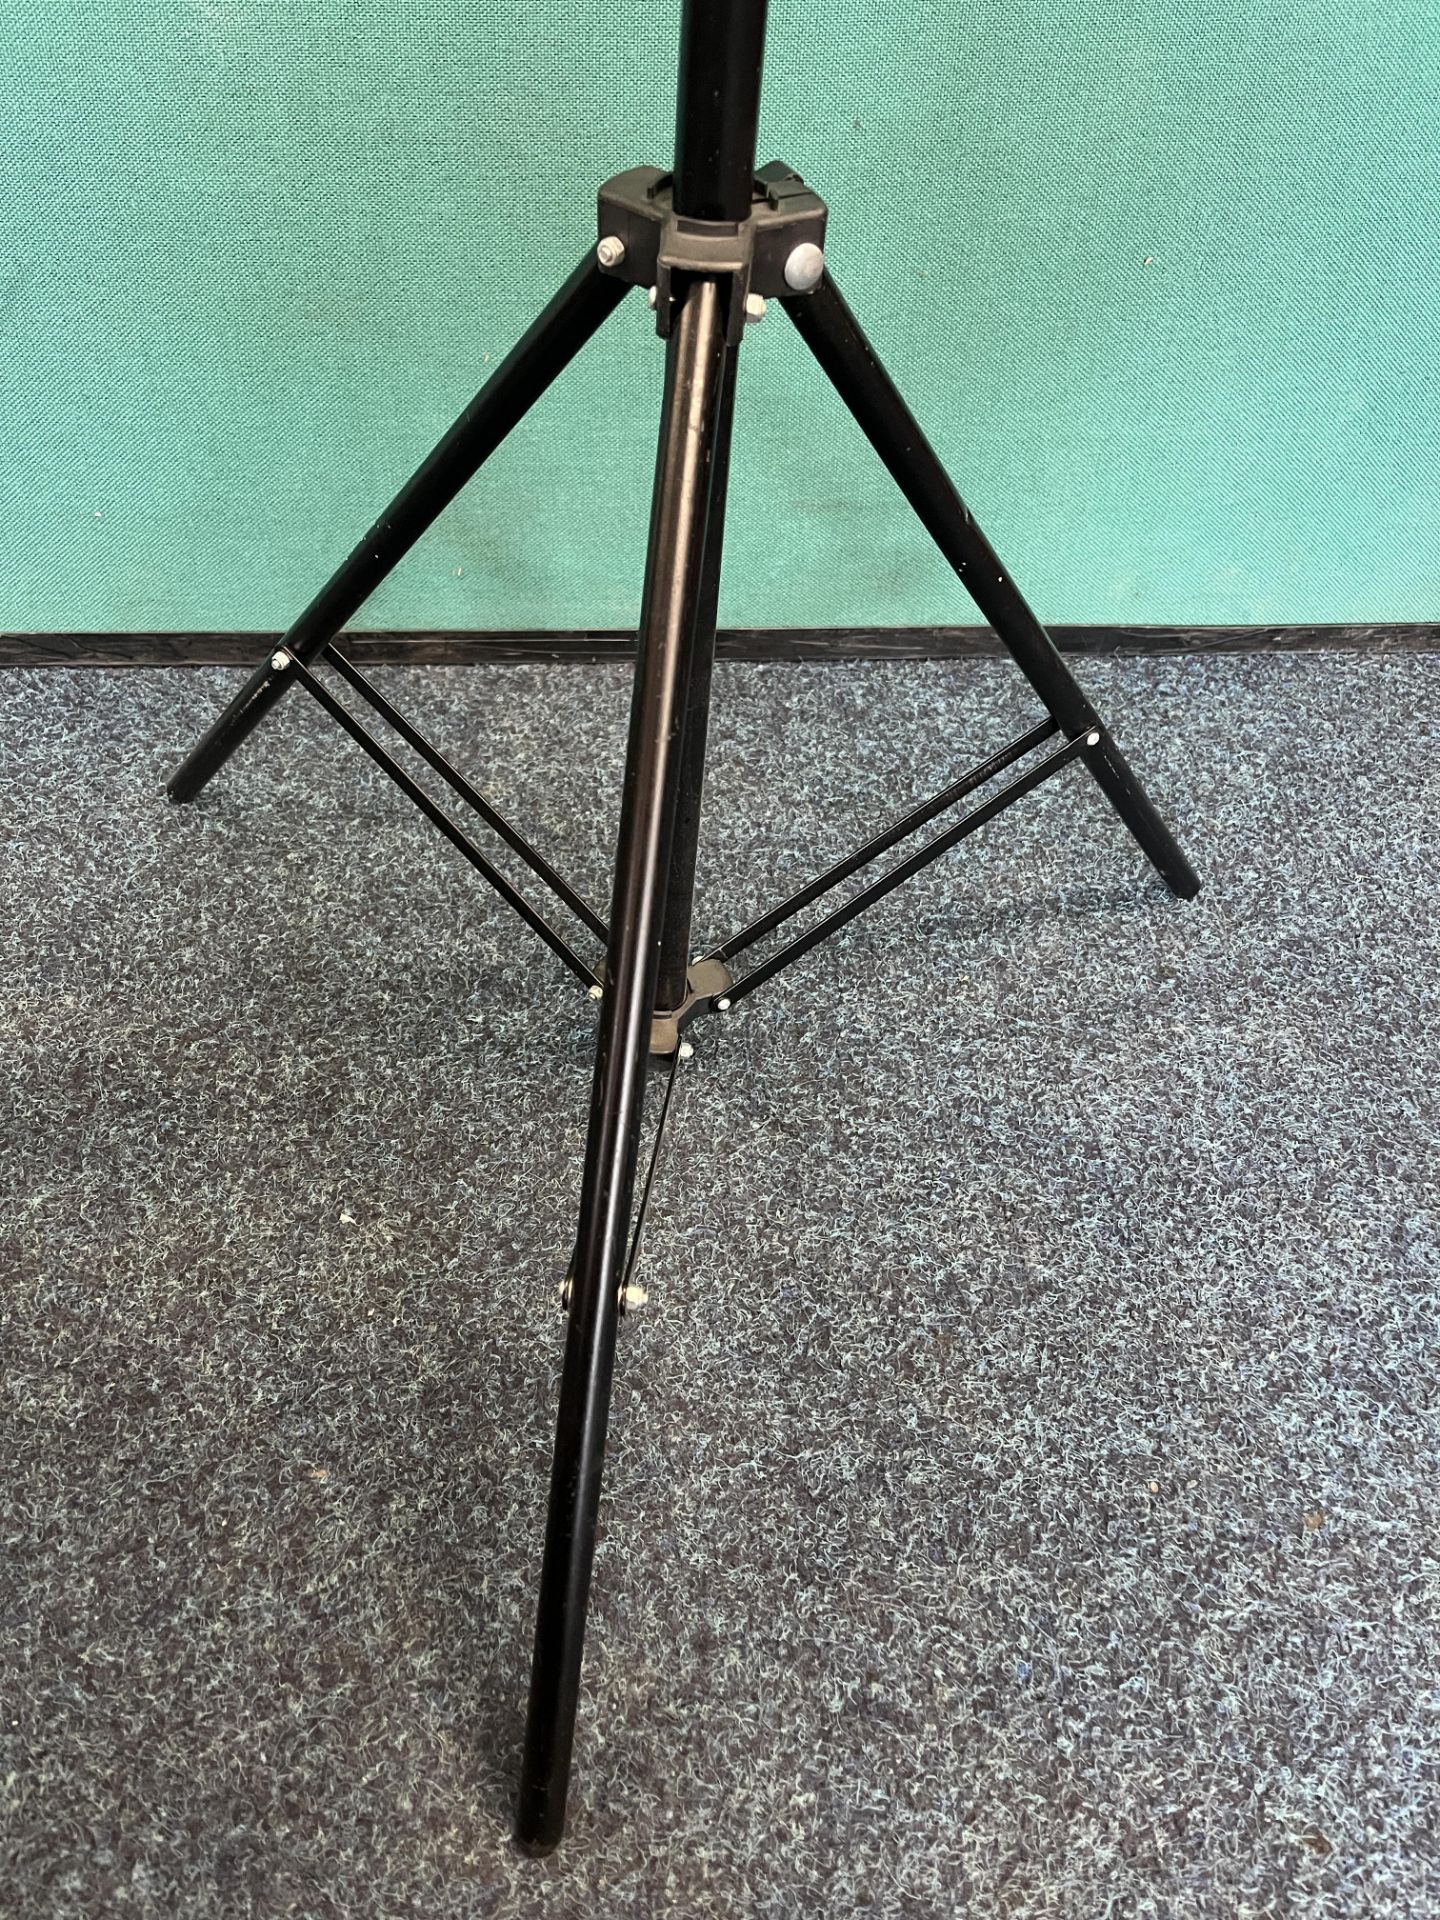 2 x Camera Tripods - As pictured - Image 6 of 6